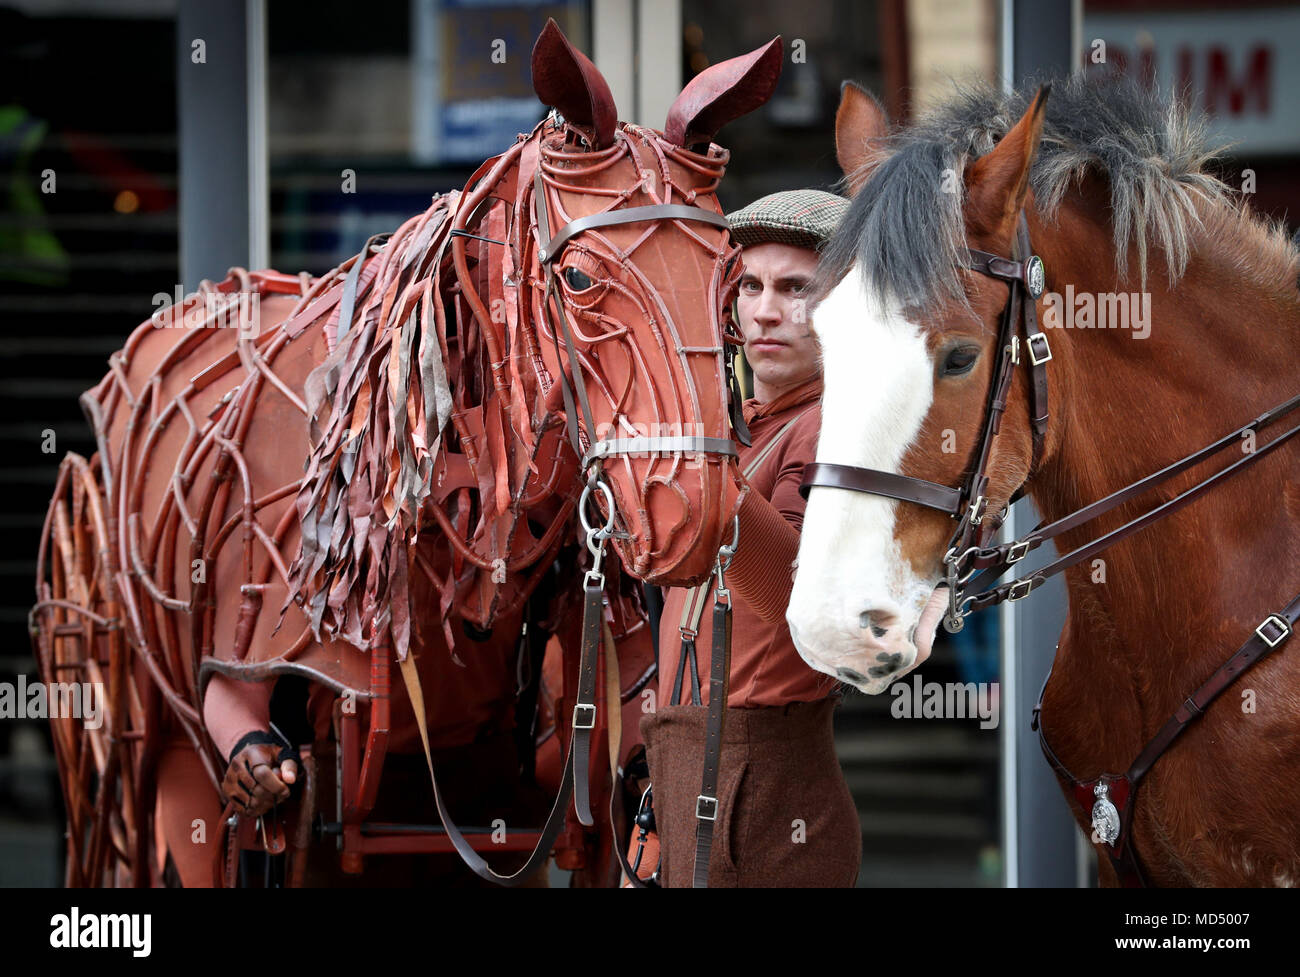 Joey, the life-size horse puppet used in War Horse, meets real horses and riders from Police Scotland's mounted unit at the Festival Theatre in Edinburgh. Stock Photo